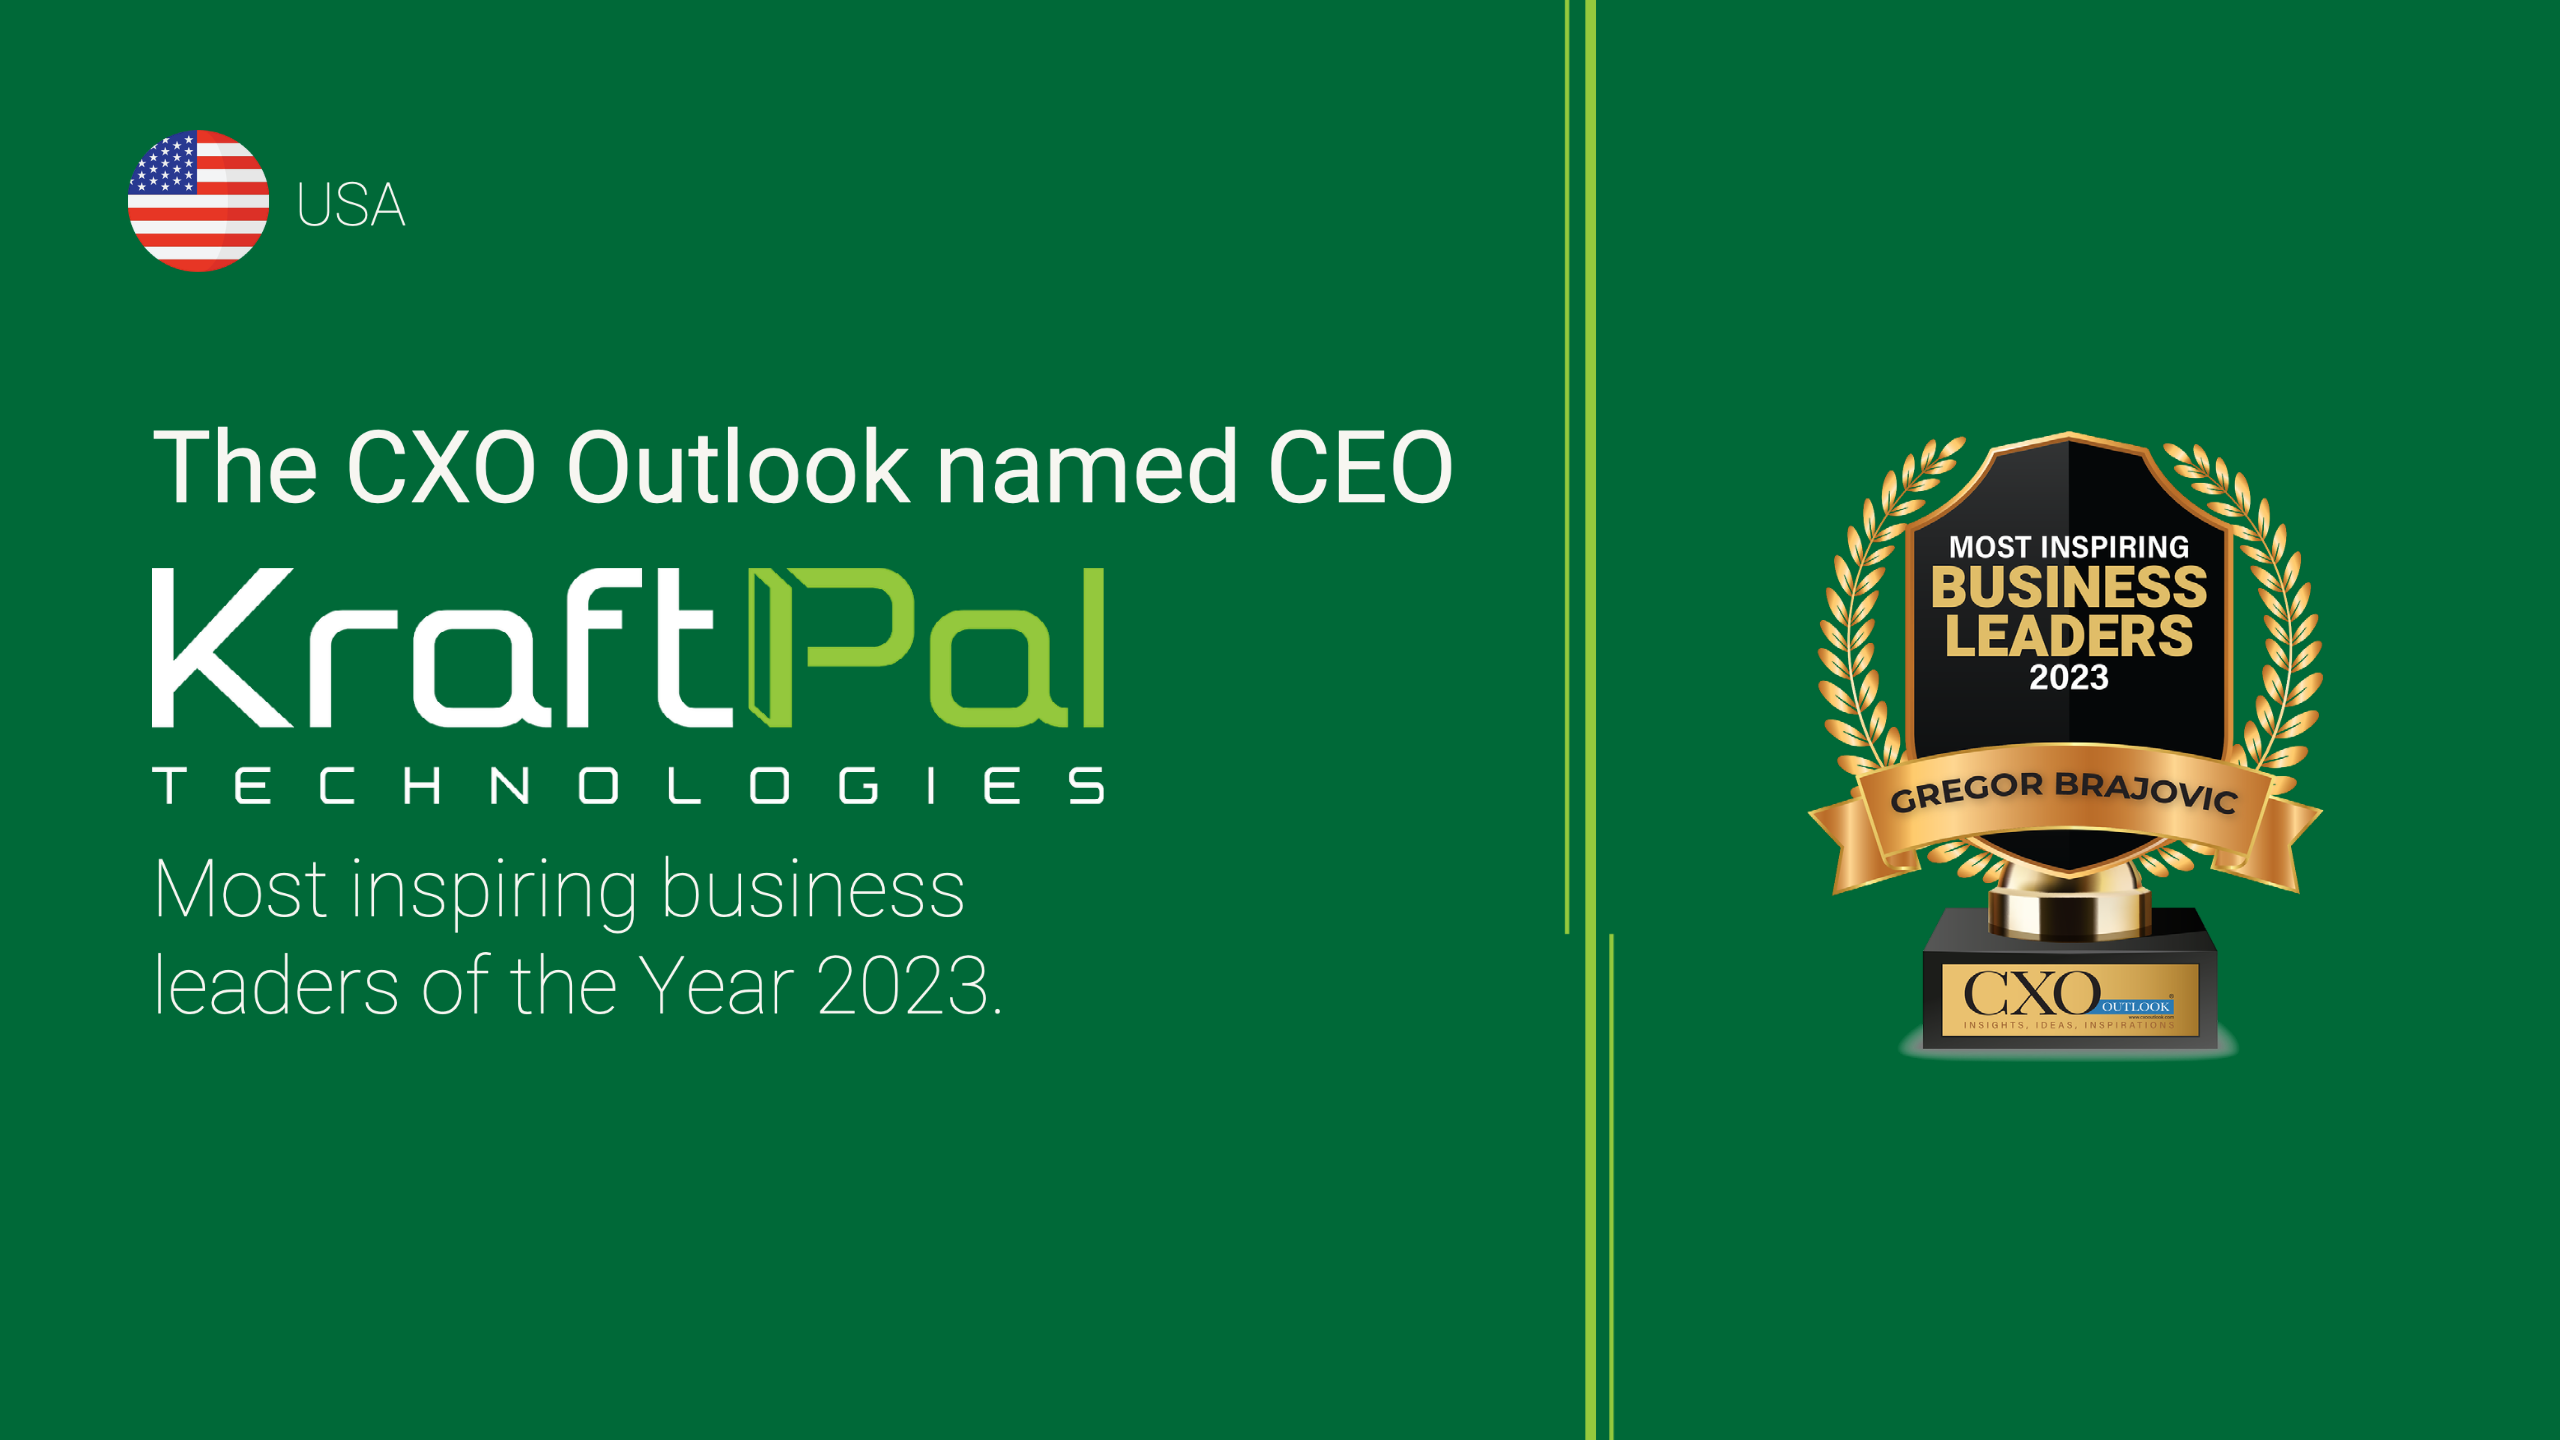 The Cxo Outlook named CEO KraftPal Technologies as most inspiring business leaders of 2023